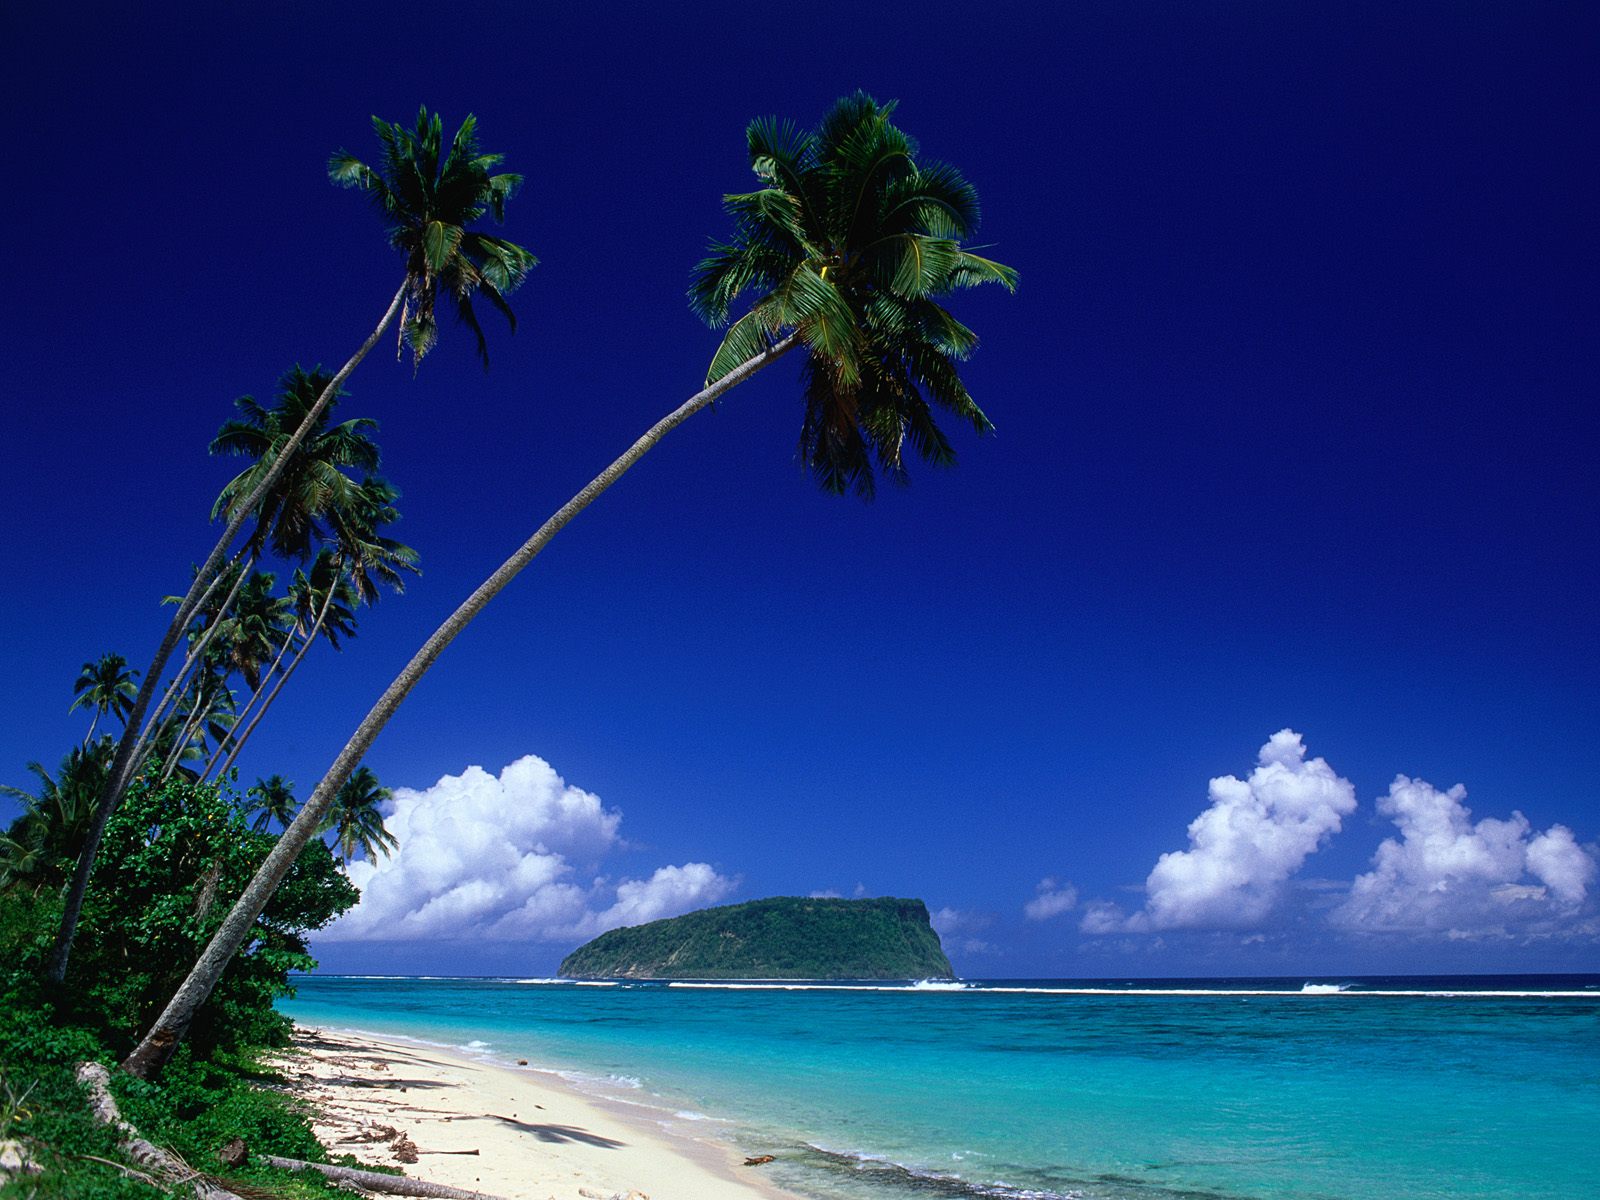 Wallpaper Apk Which Is Under The Beach Category Of HD